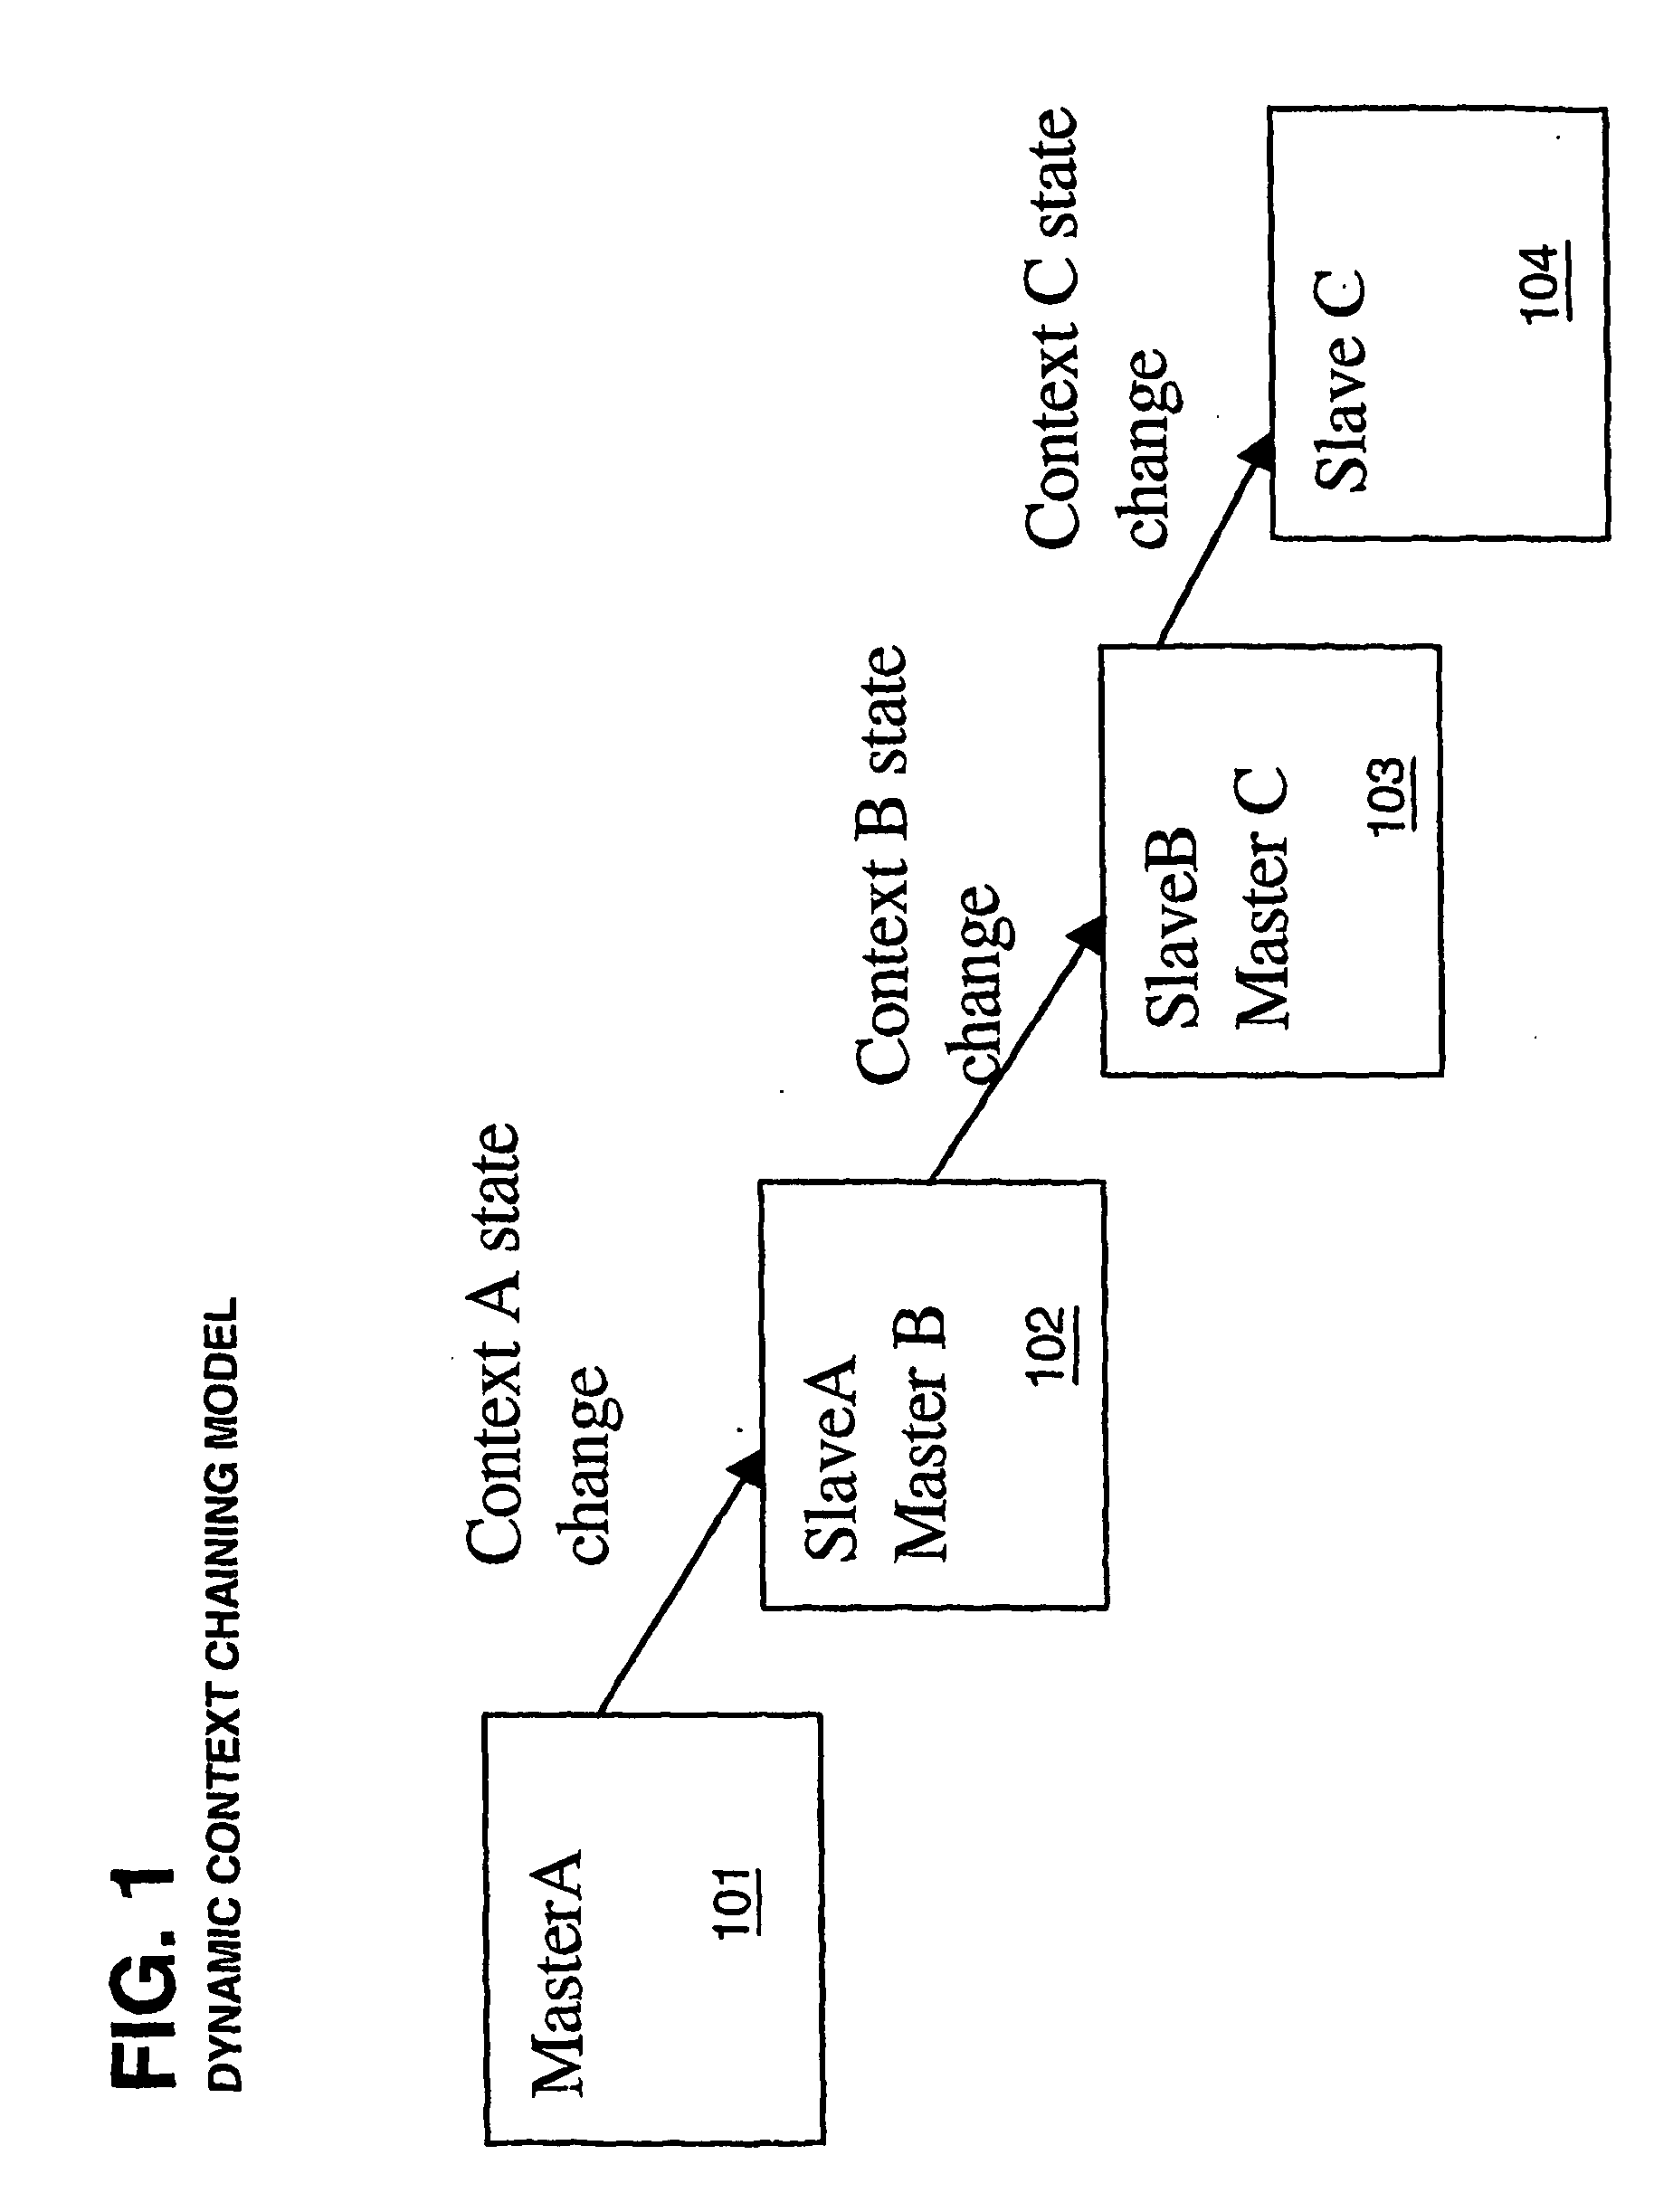 Method and apparatus for managing a collection of portlets in a portal server